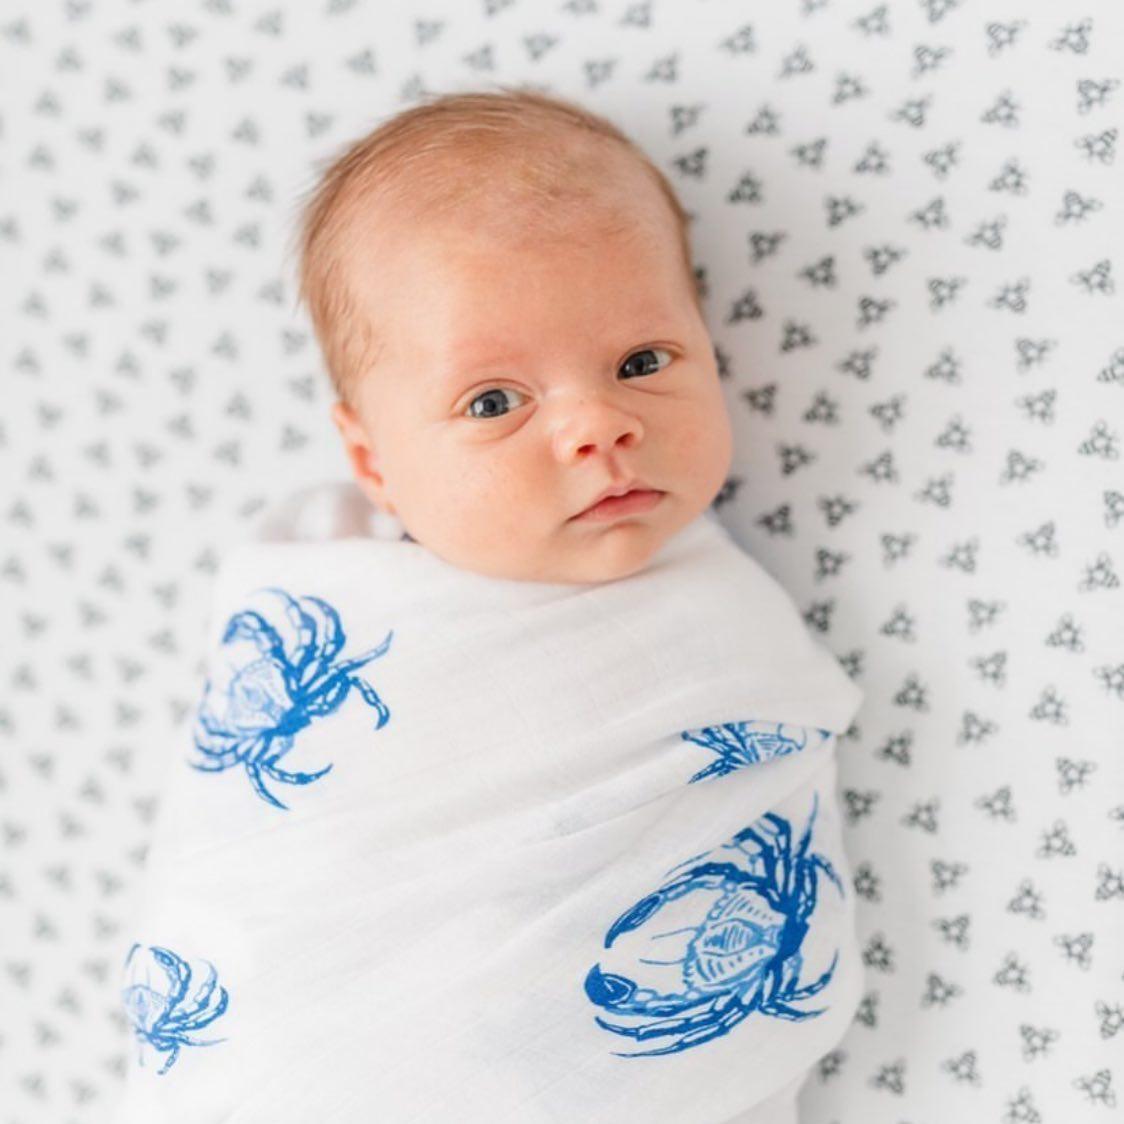 Blue crab-themed baby muslin swaddle blanket and burp cloth set, featuring playful crab illustrations.